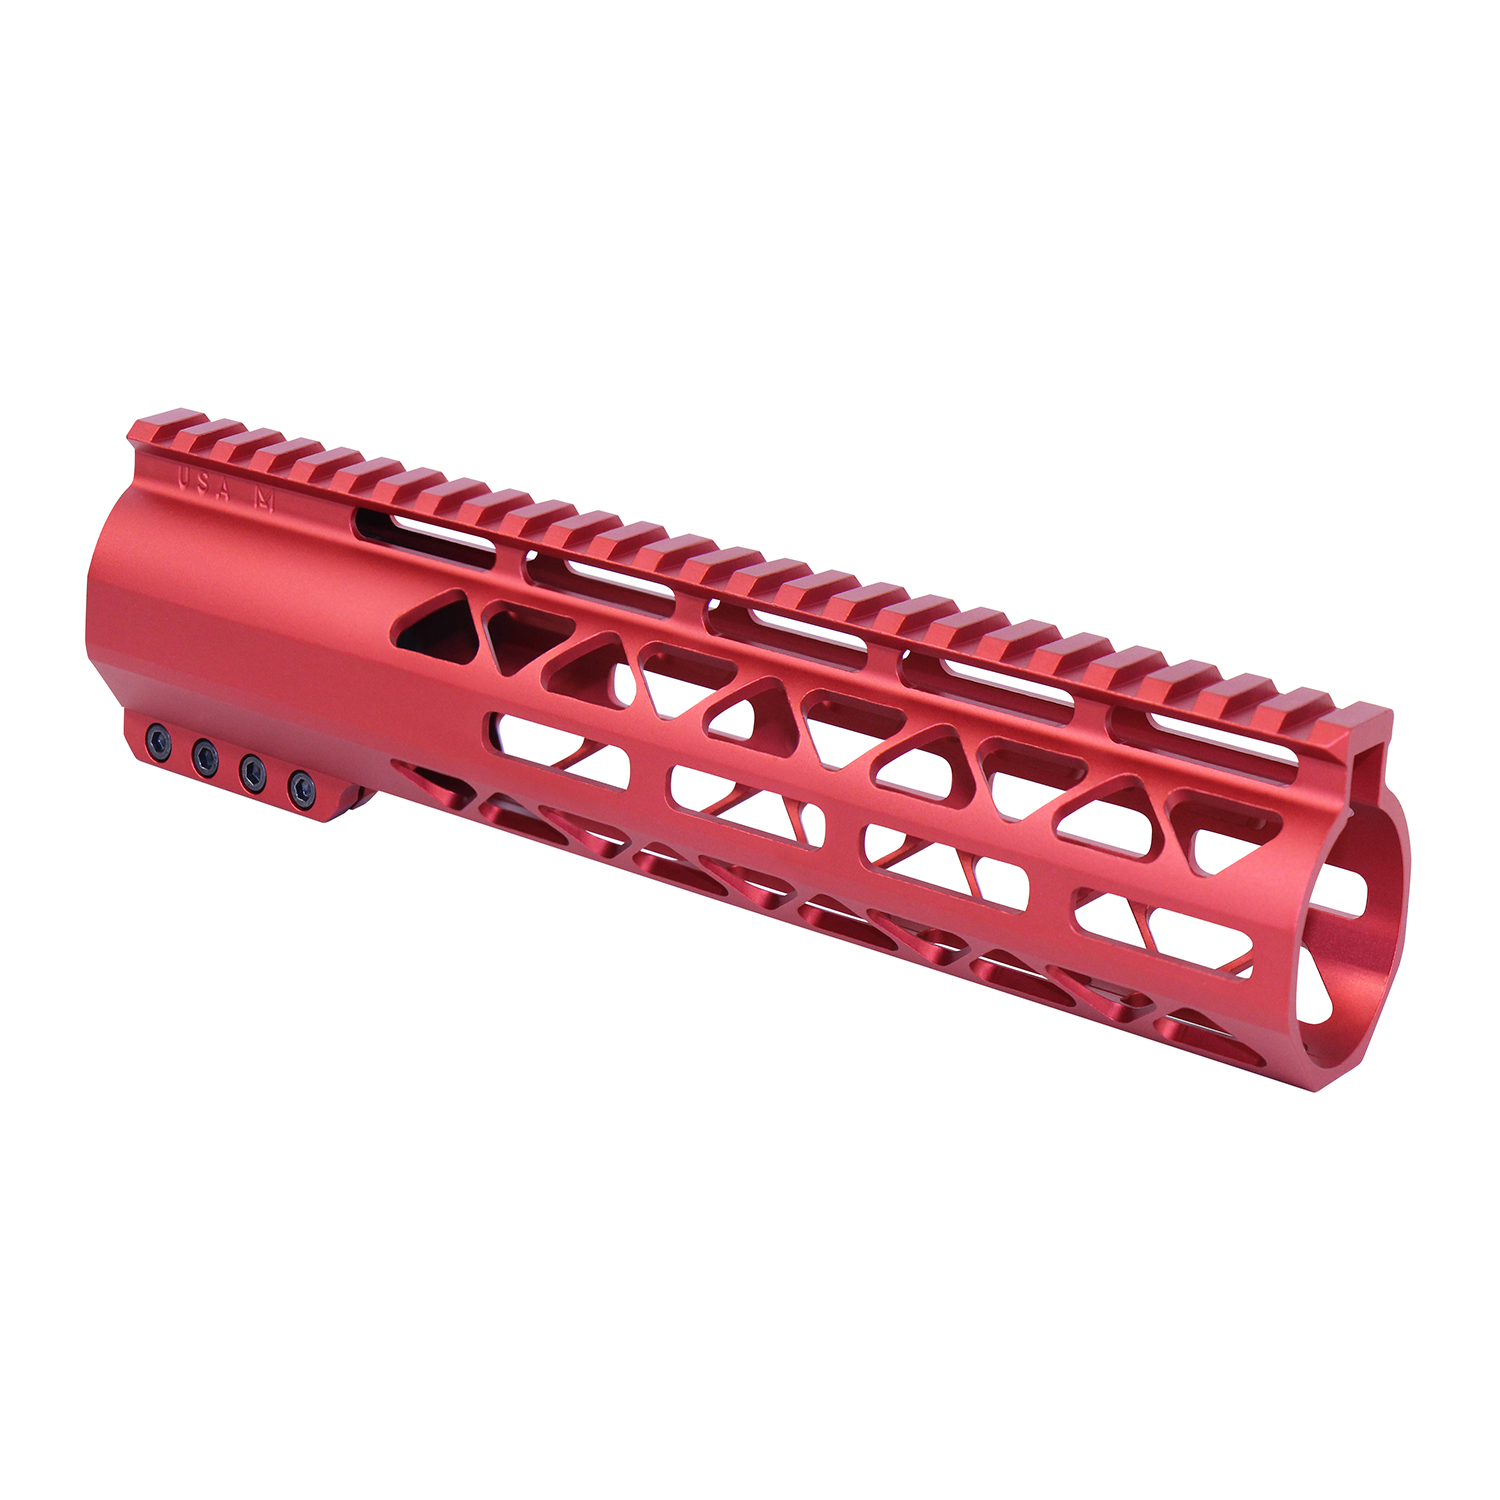 10" AIR-LOK Series M-LOK Compression Free Floating Handguard With Monolithic Top Rail (.308 Cal) (Anodized Red)